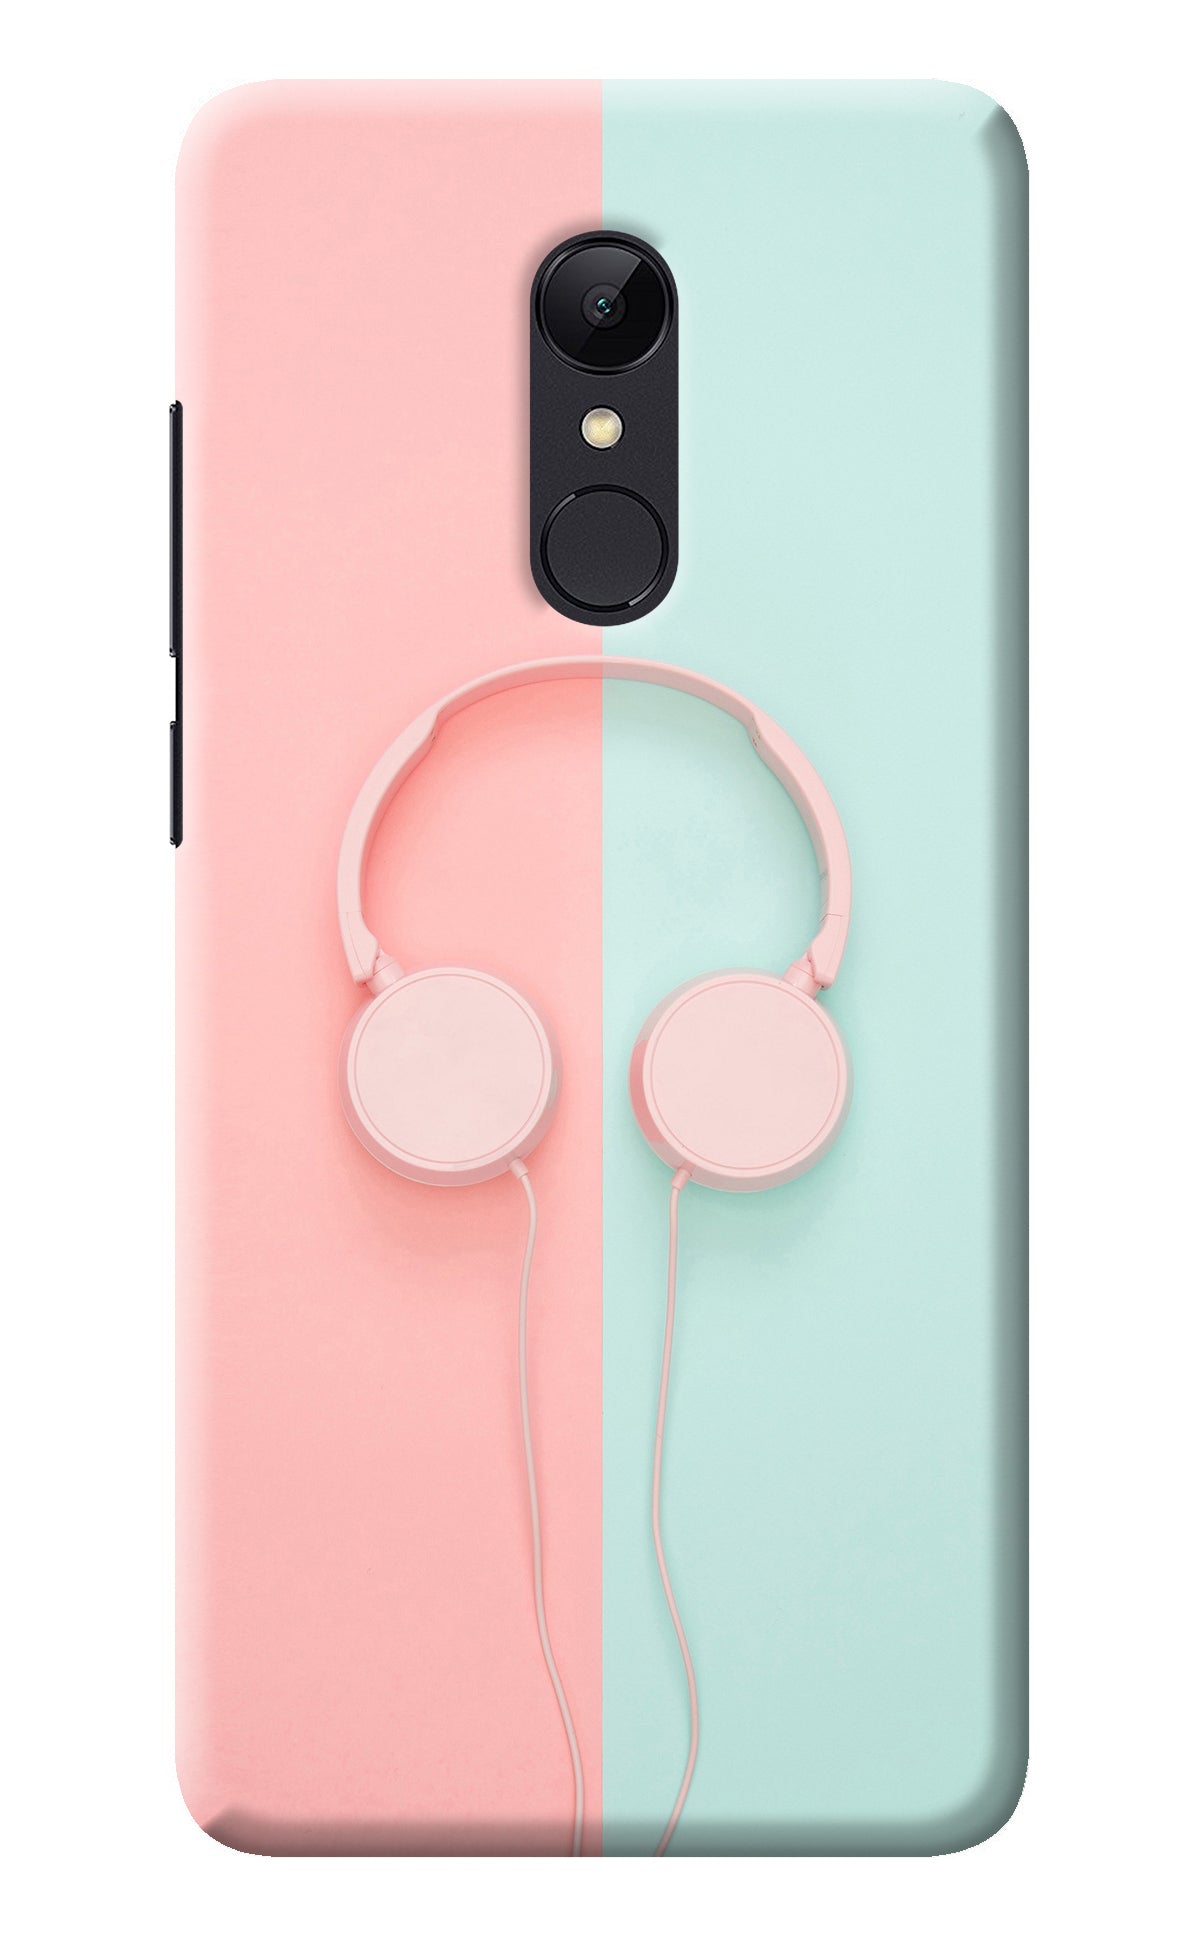 Music Lover Redmi Note 4 Back Cover